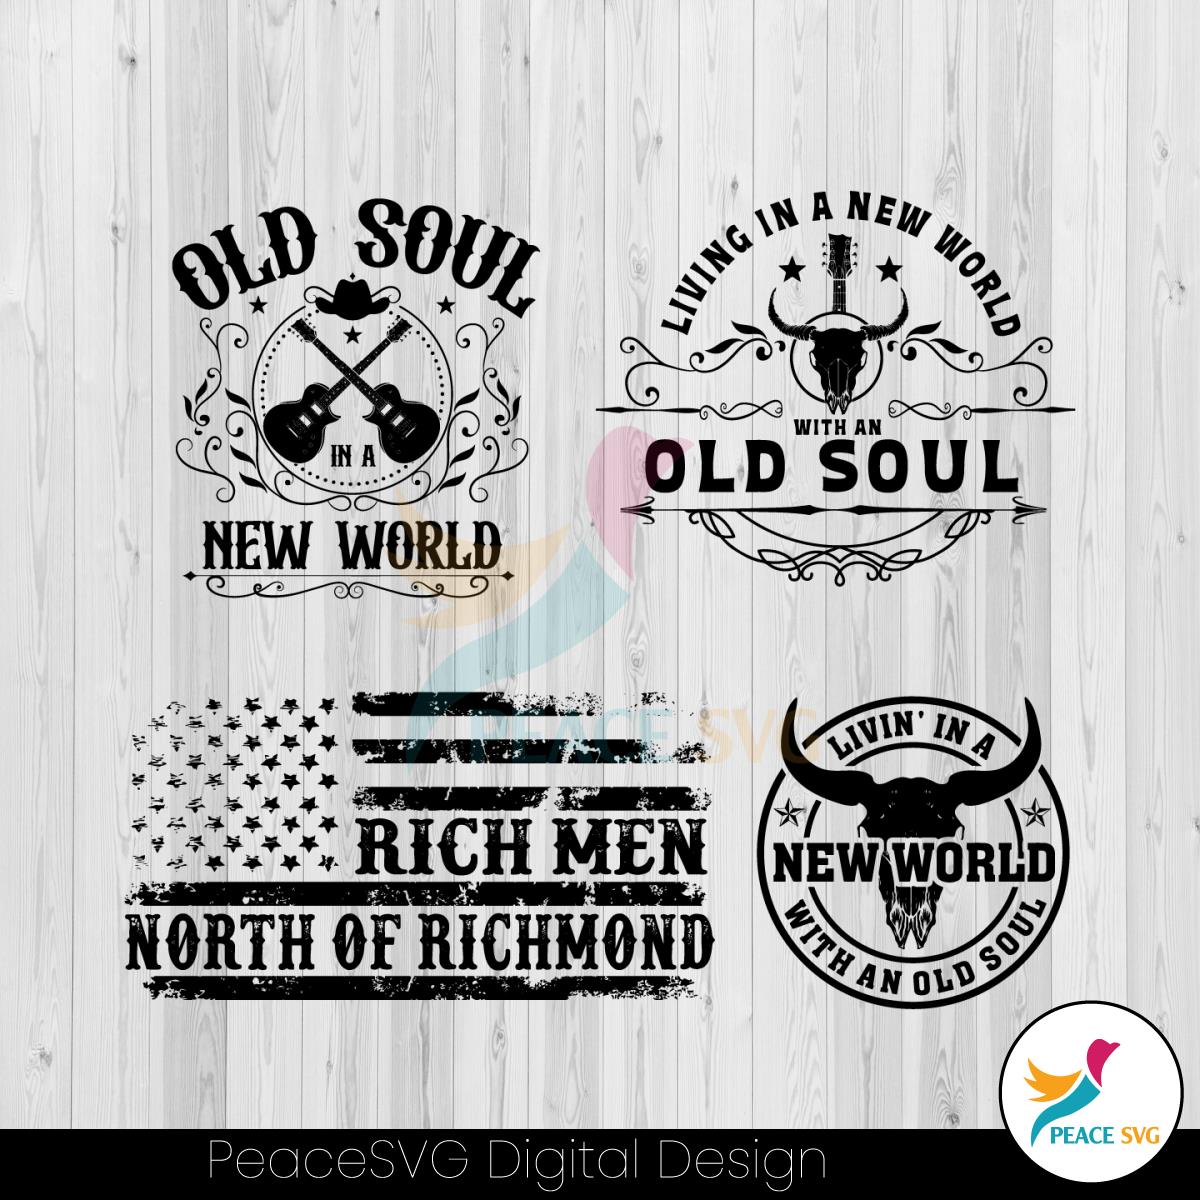 Vintage Living In A New World With An Old Soul SVG Bundle » PeaceSVG